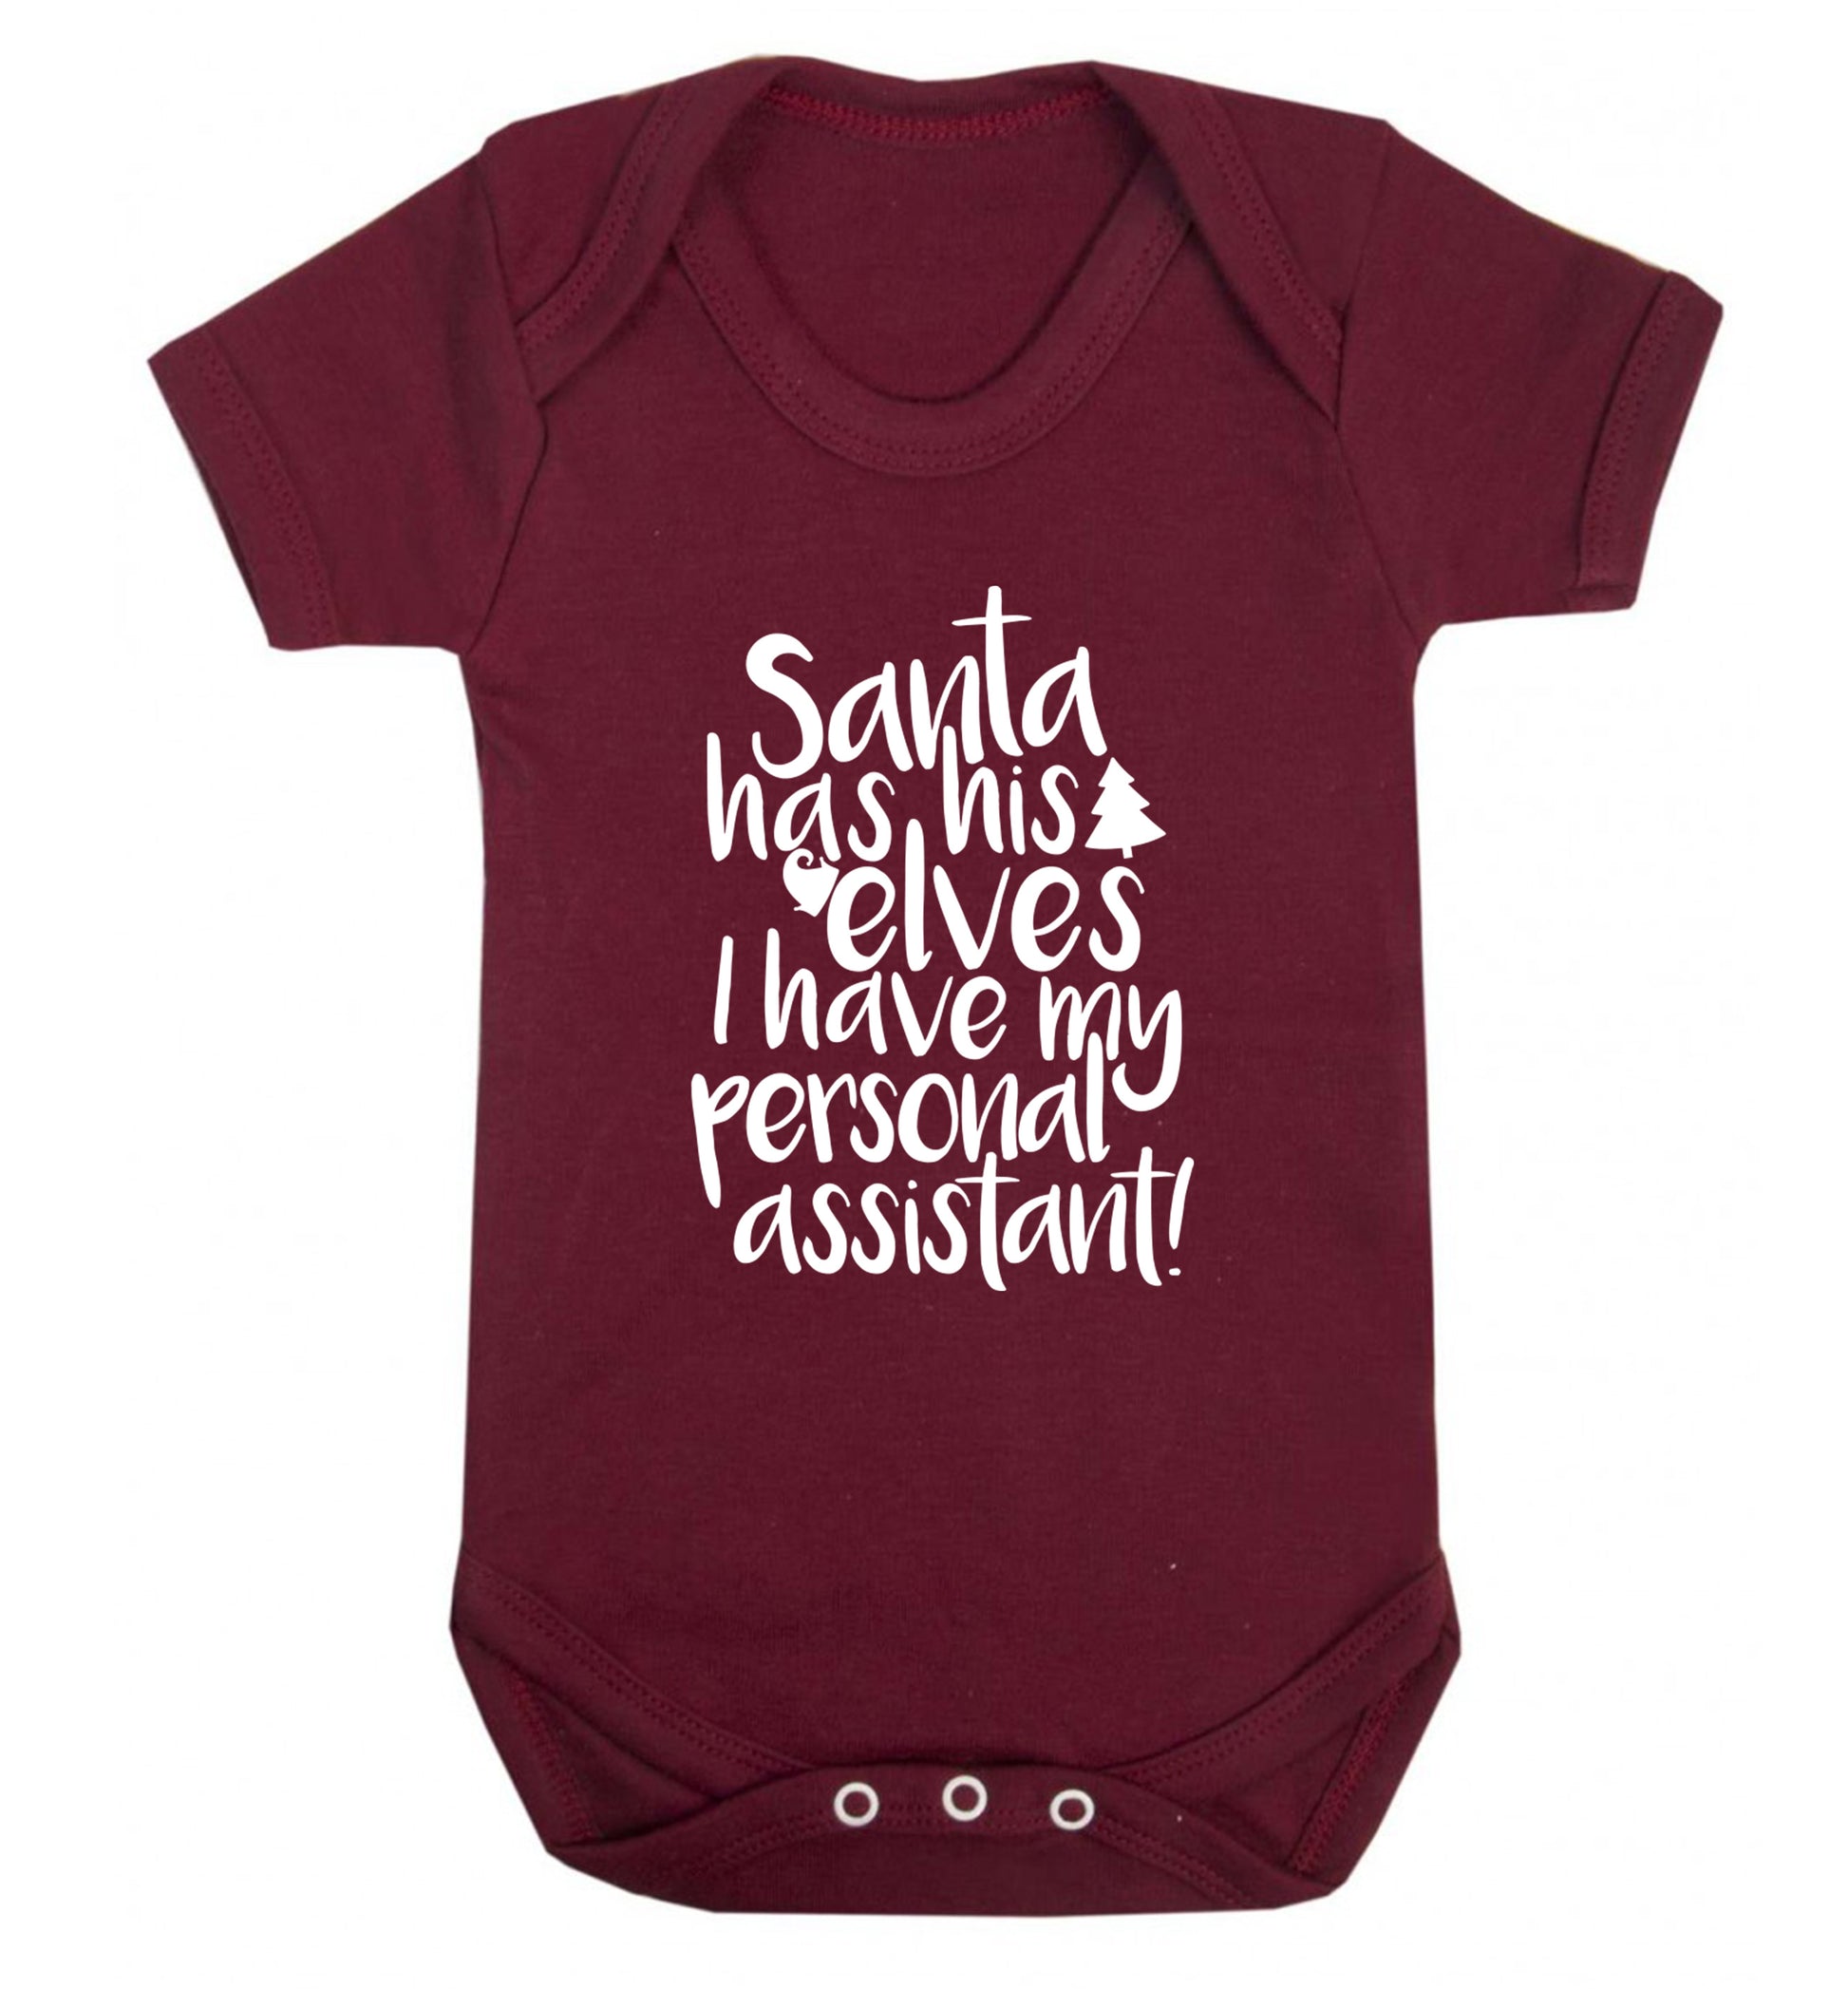 Santa has his elves I have my personal assistant Baby Vest maroon 18-24 months